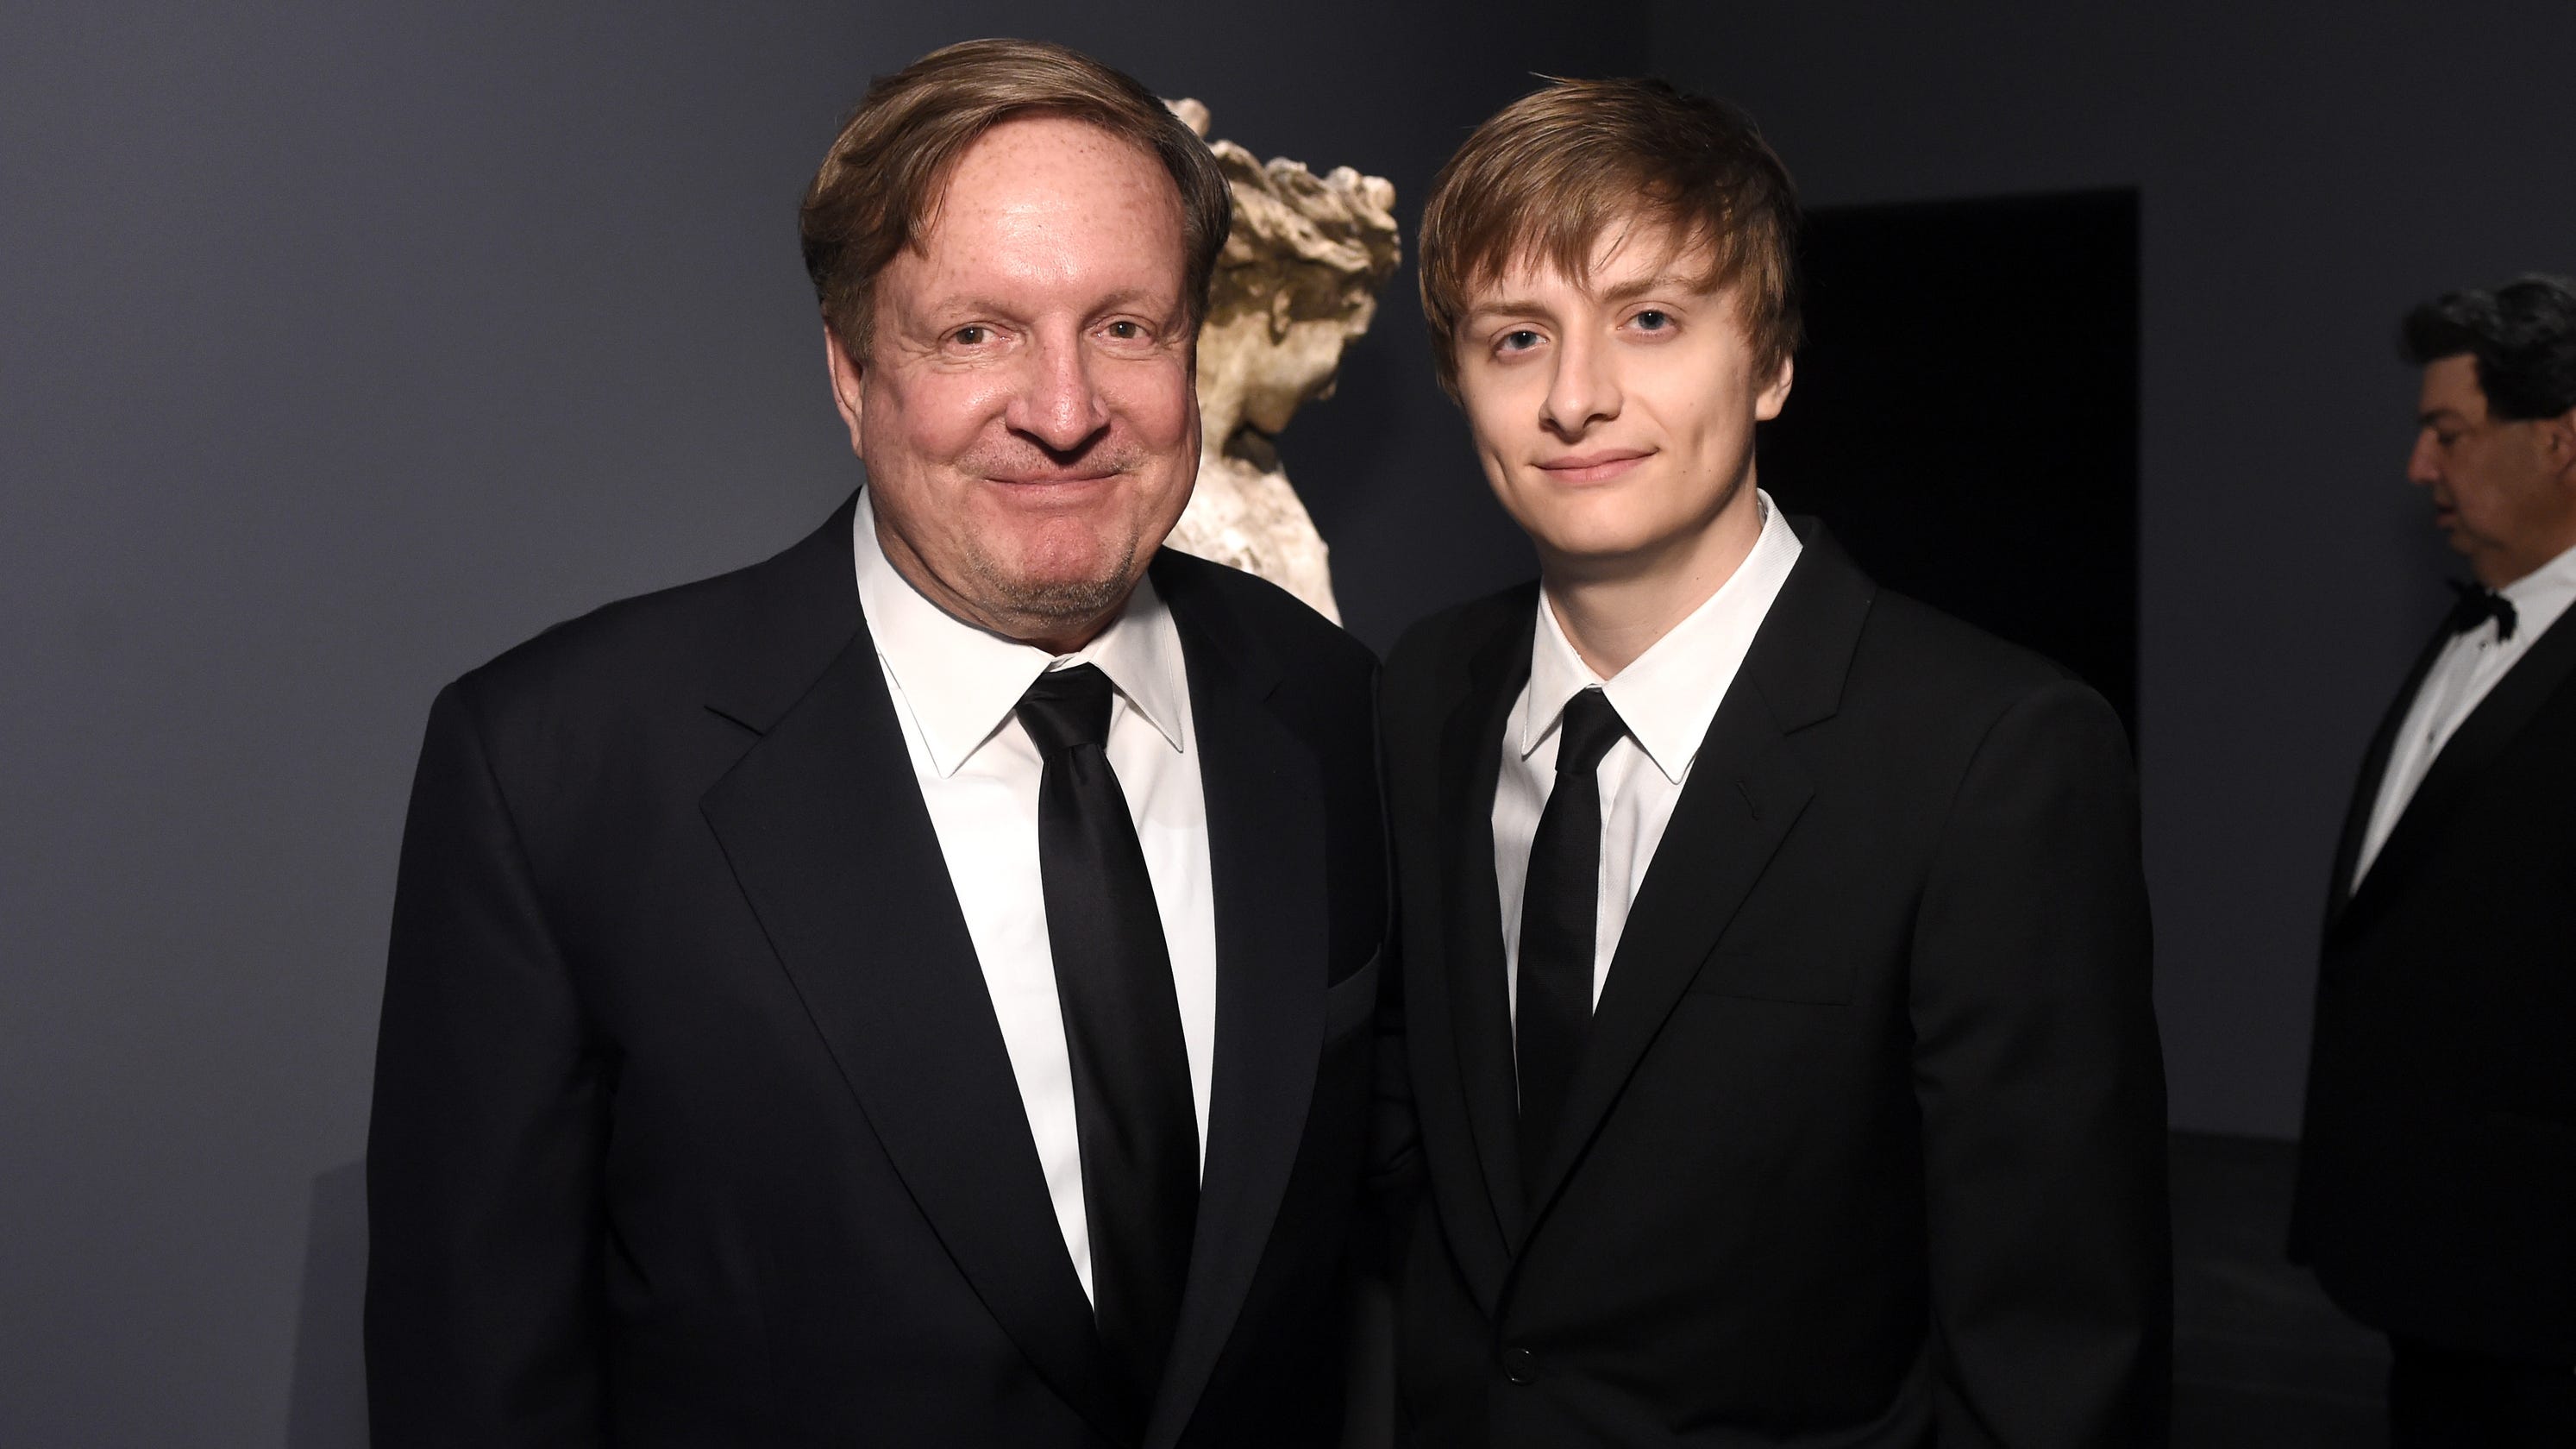 Billionaire Ron Burkle S Adult Son Found Dead At Beverly Hills Home Images, Photos, Reviews